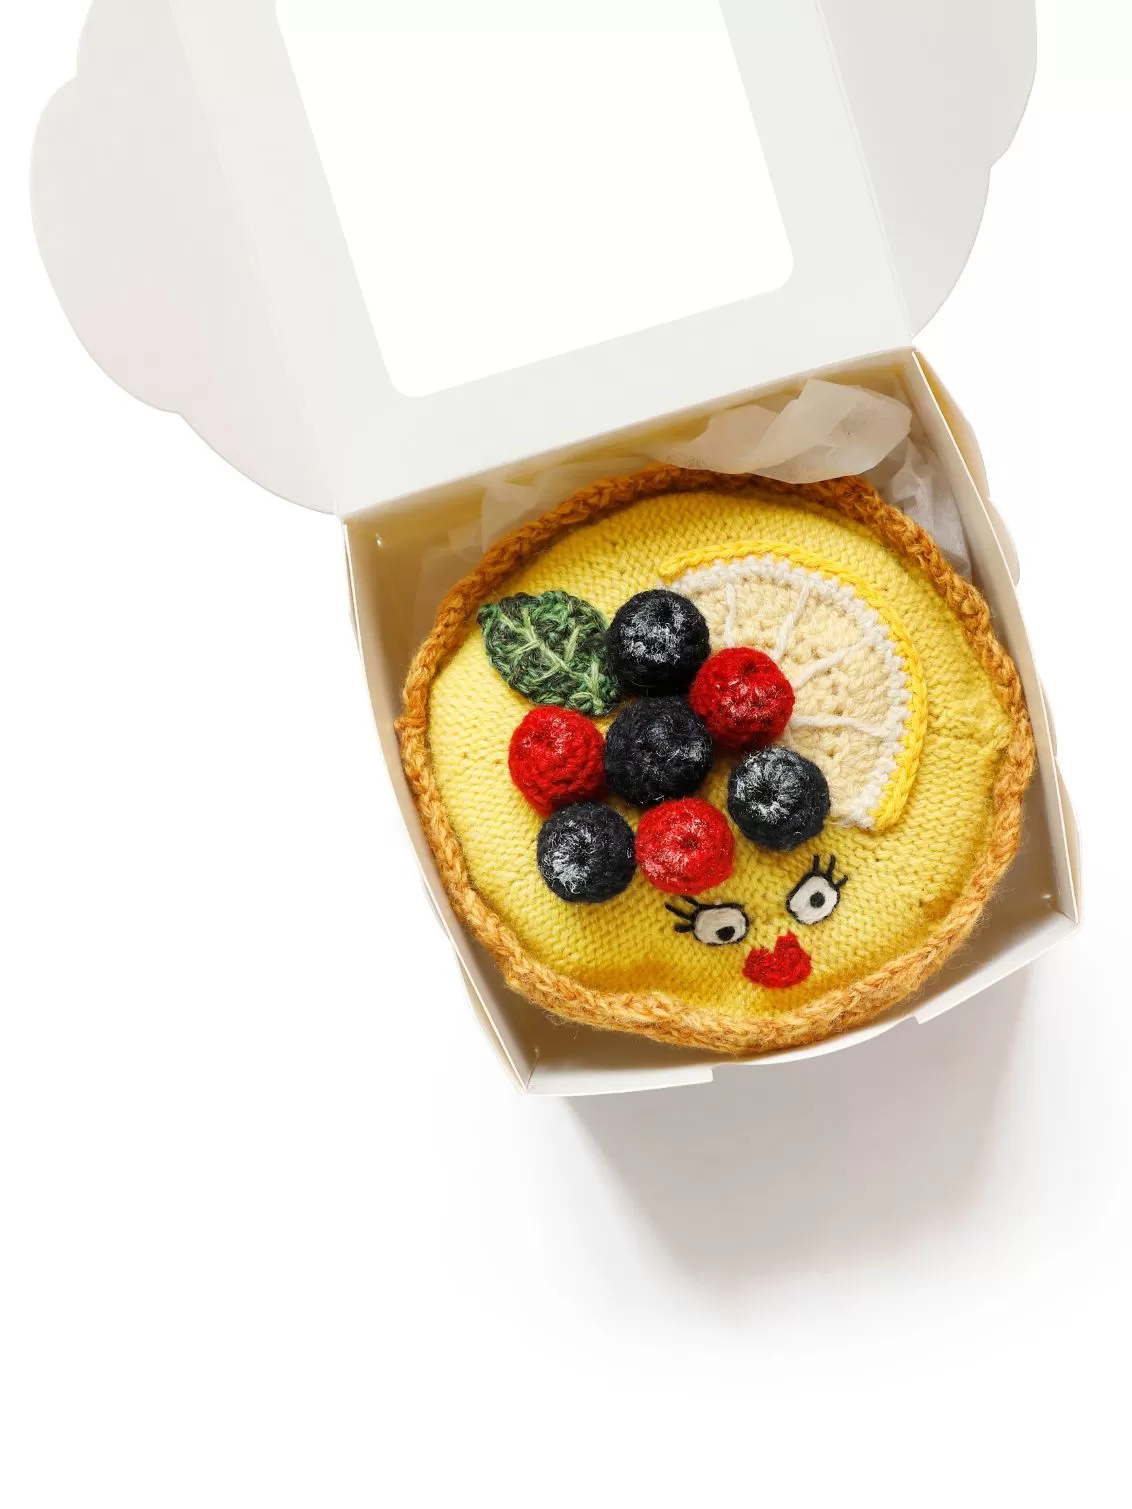 Kate Jenkins hand embroidered and crotched Lemon Tart with blueberries and rasberries on top. Seen nestled in a cake box with tissue paper.